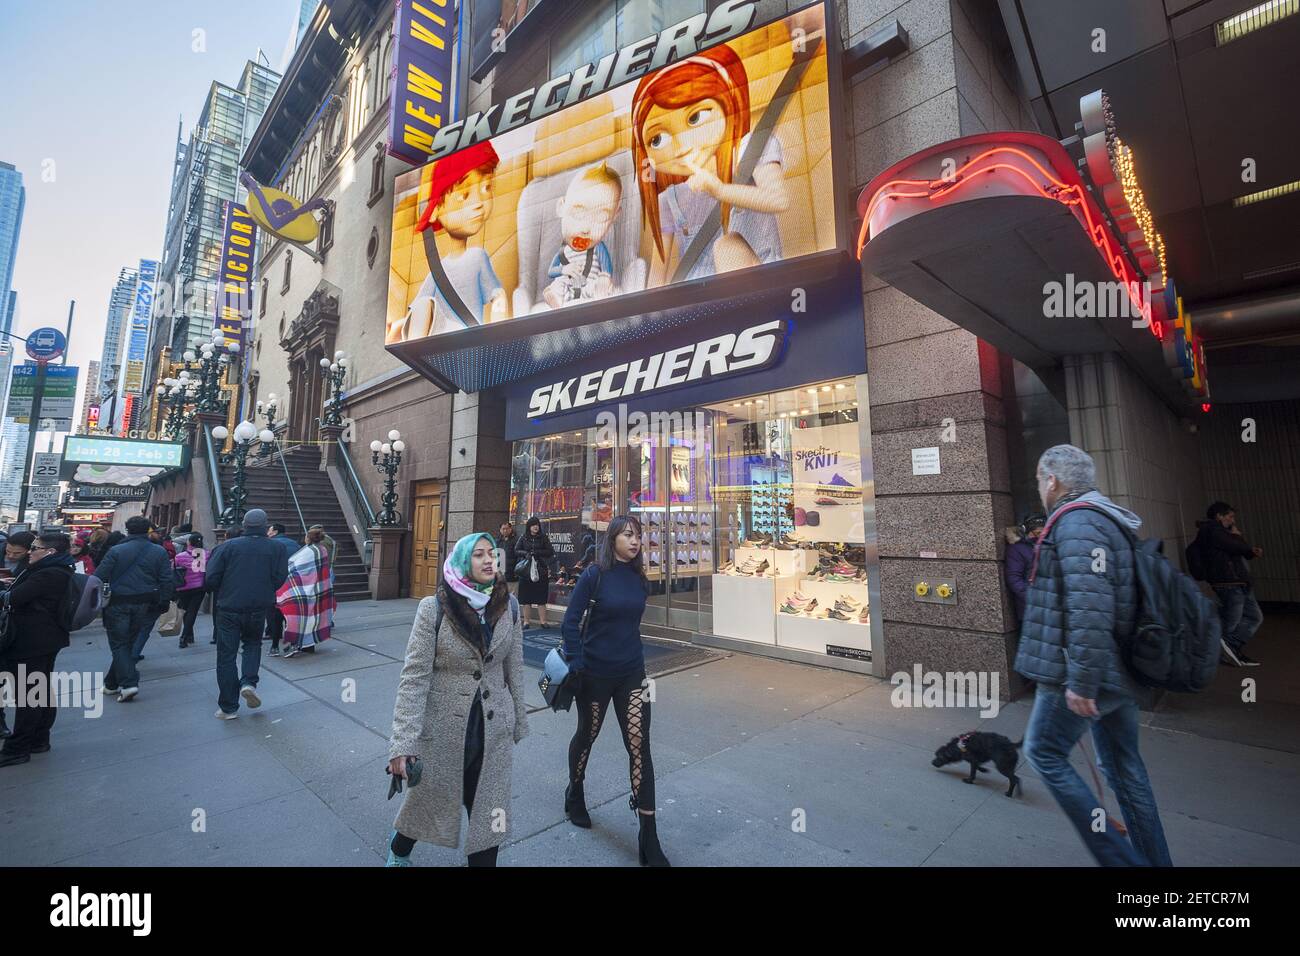 A Skechers store in in New York on Wednesday, January 25, 2017. Skechers has filed a petition with the Patent Trial Board to invalidate two of Nike's patents.